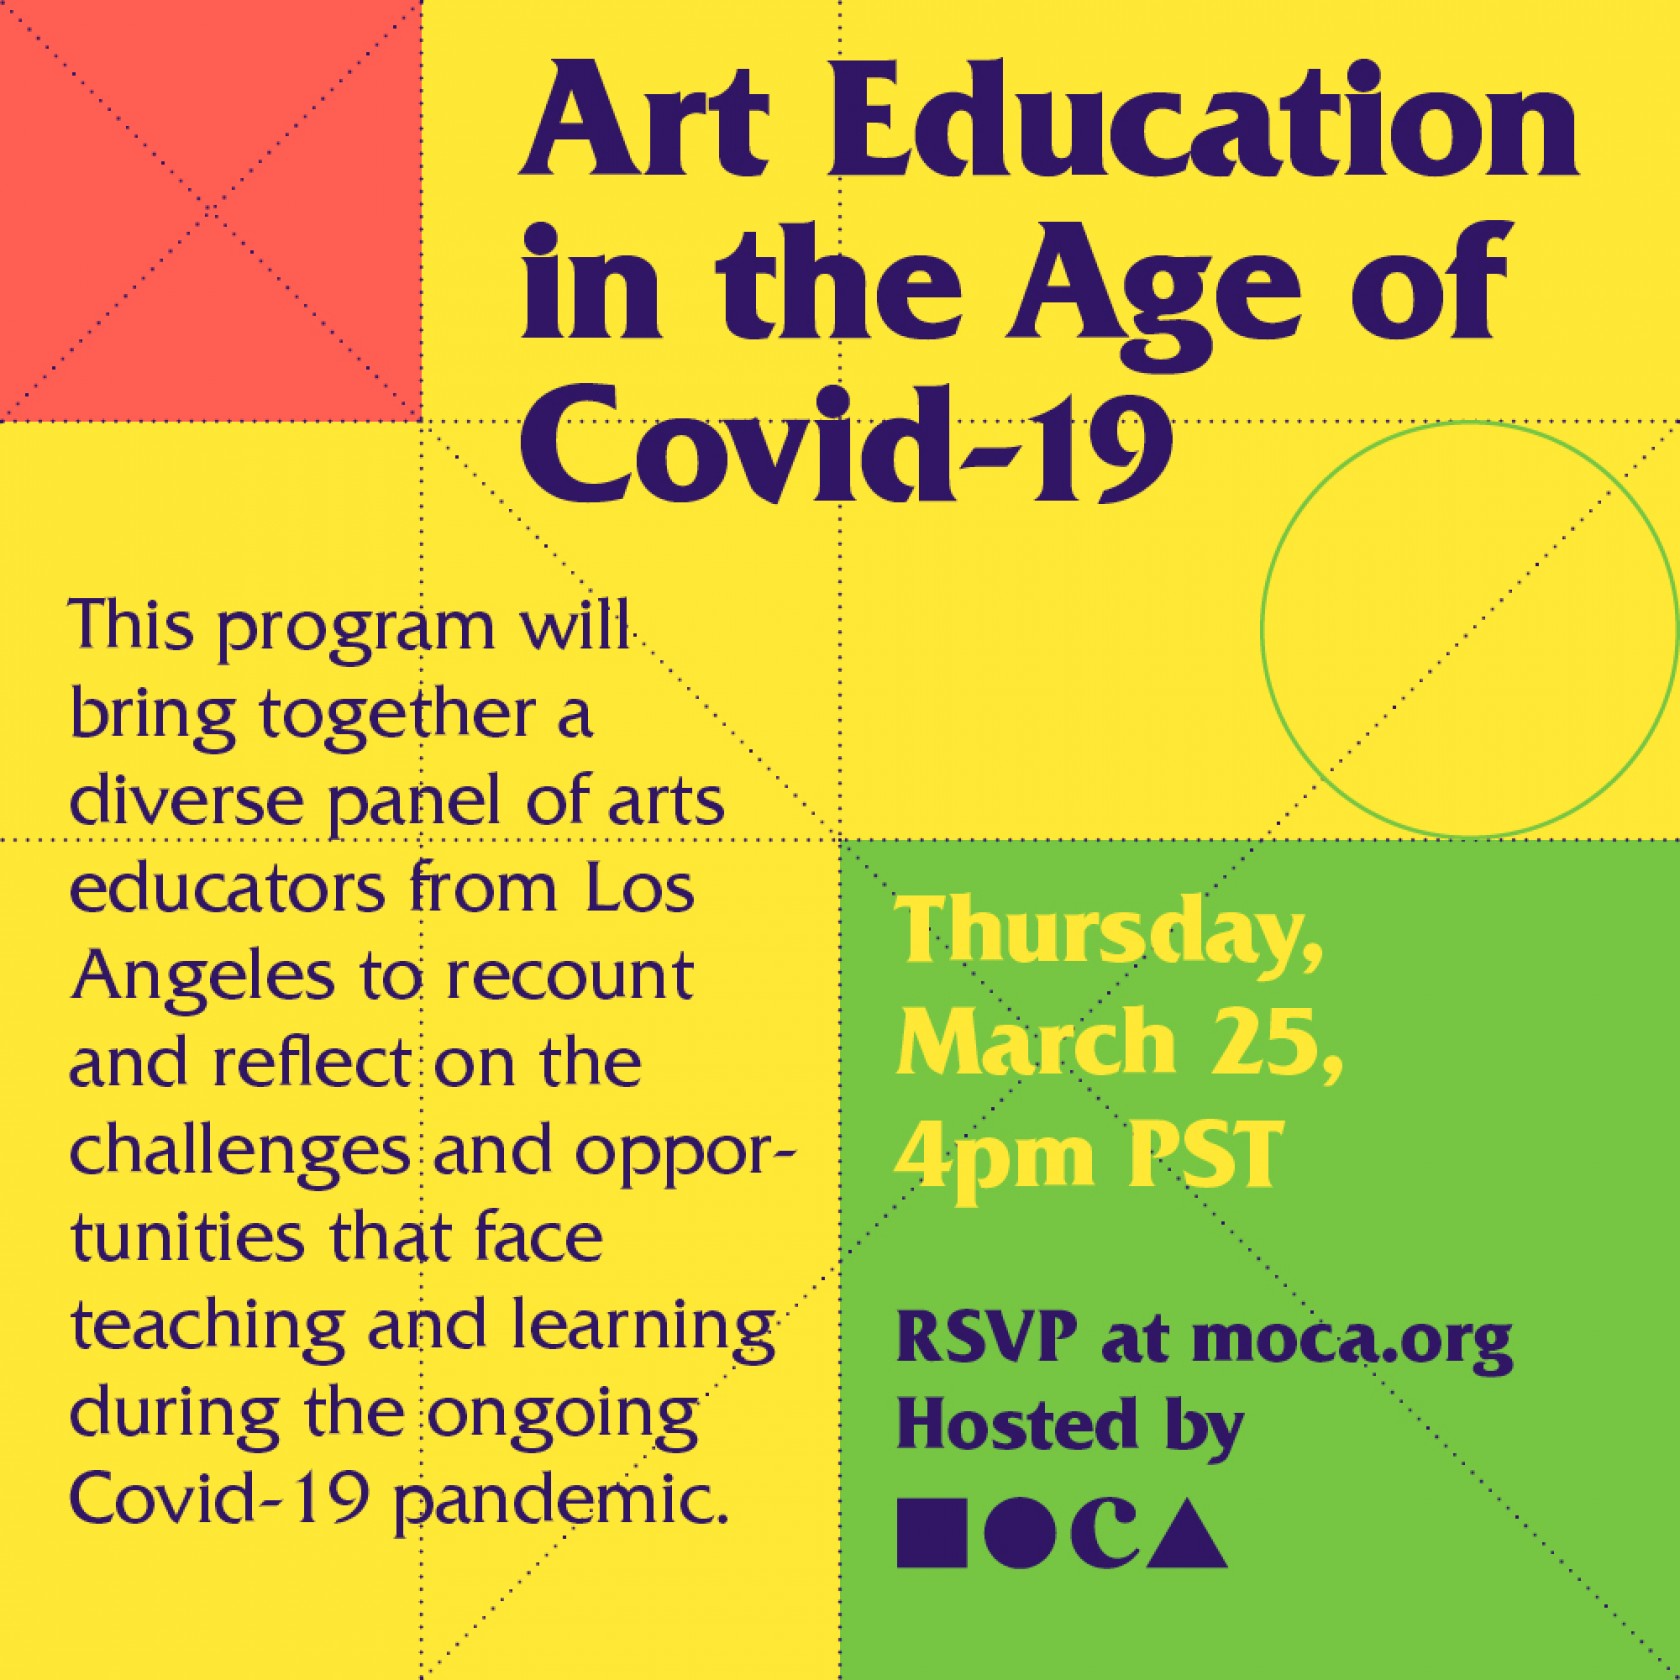 Art Education in the Age of Covid-19